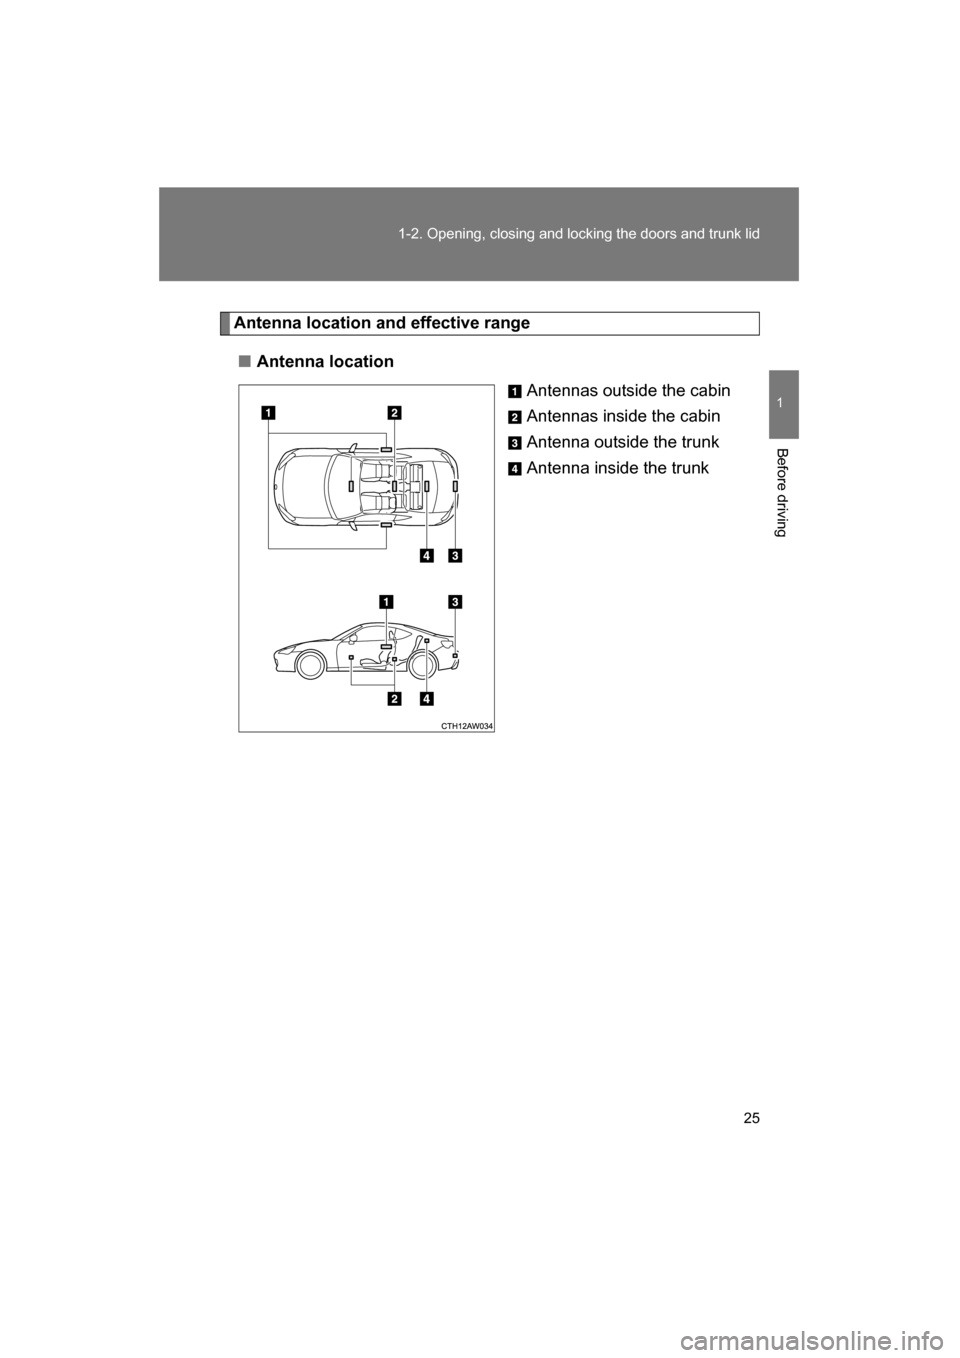 SUBARU BRZ 2015 1.G Owners Manual 25
1-2. Opening, closing and locking the doors and trunk lid
1
Before driving
Antenna location and effective range
■Antenna locationAntennas outside the cabin 
Antennas inside the cabin
Antenna outs